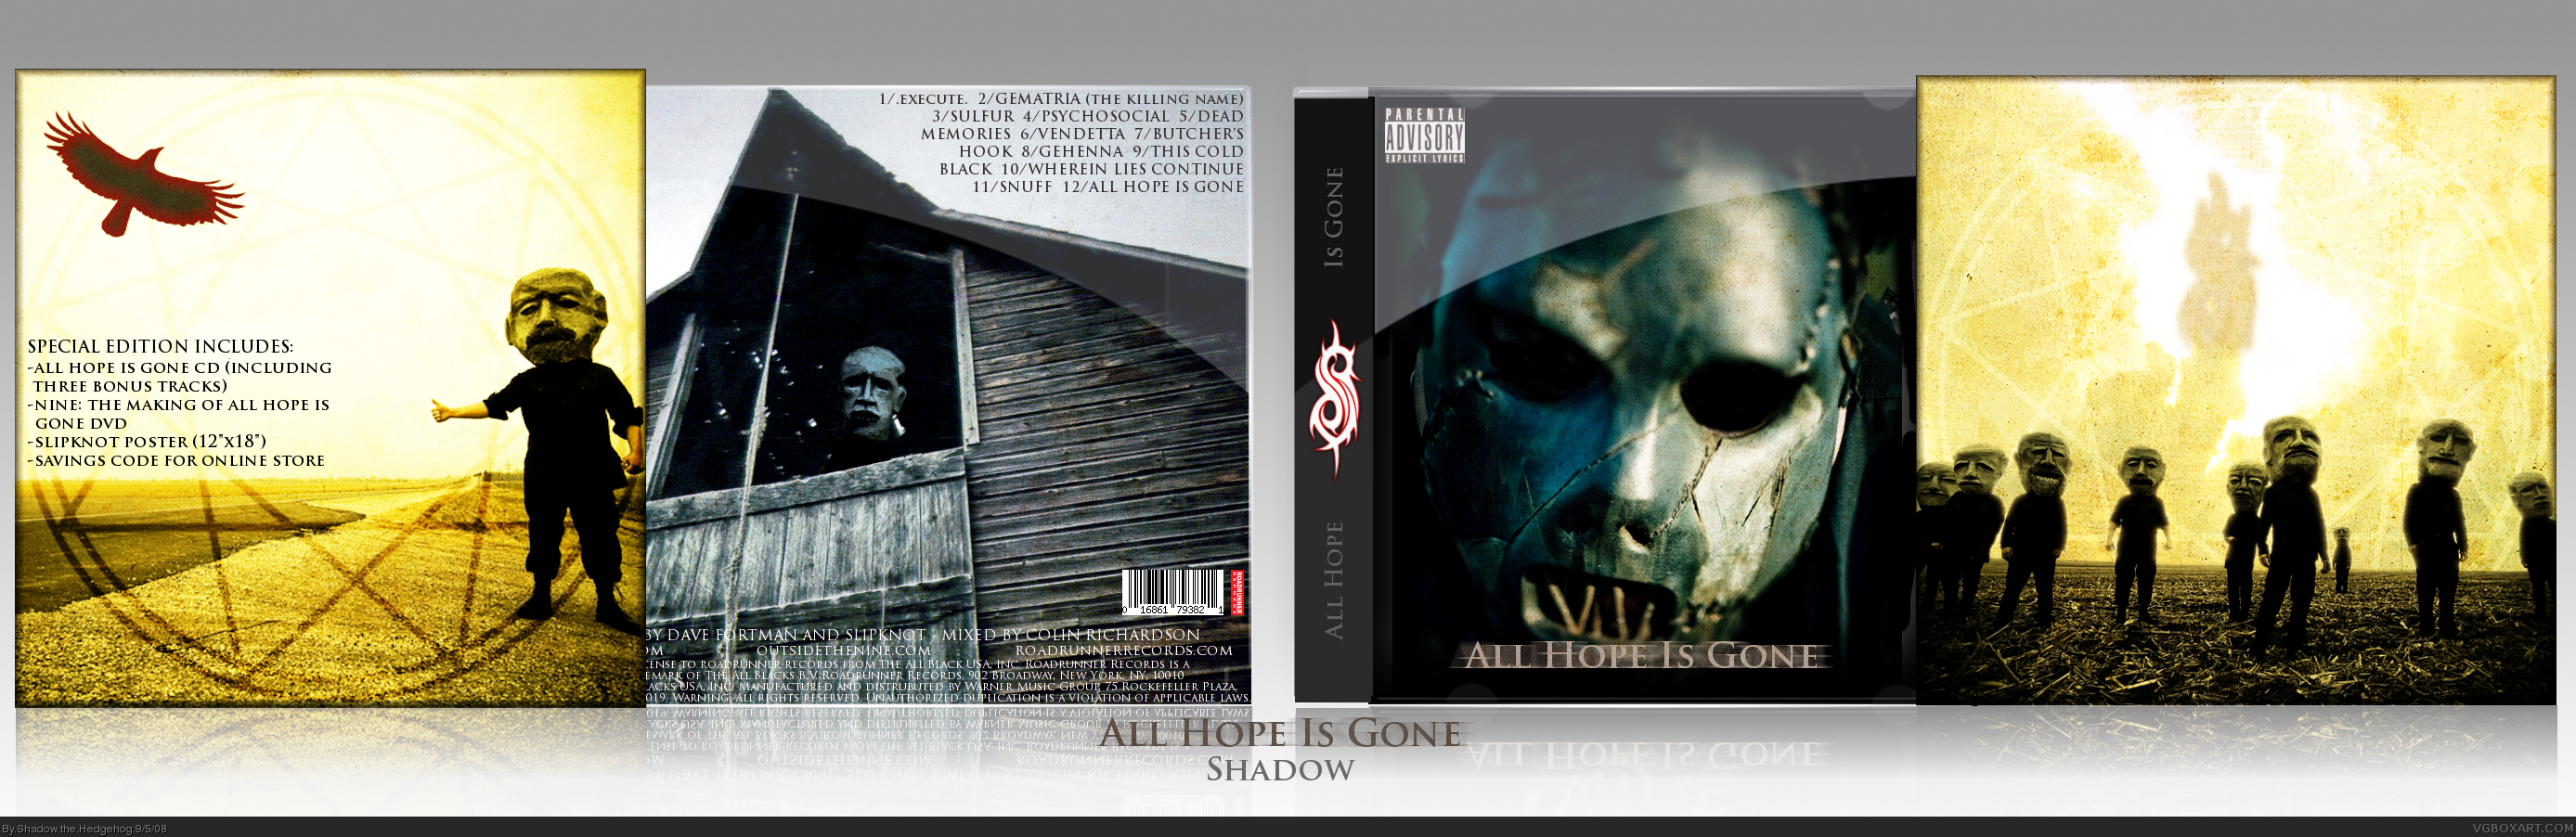 All Hope Is Gone: Special Edition box cover